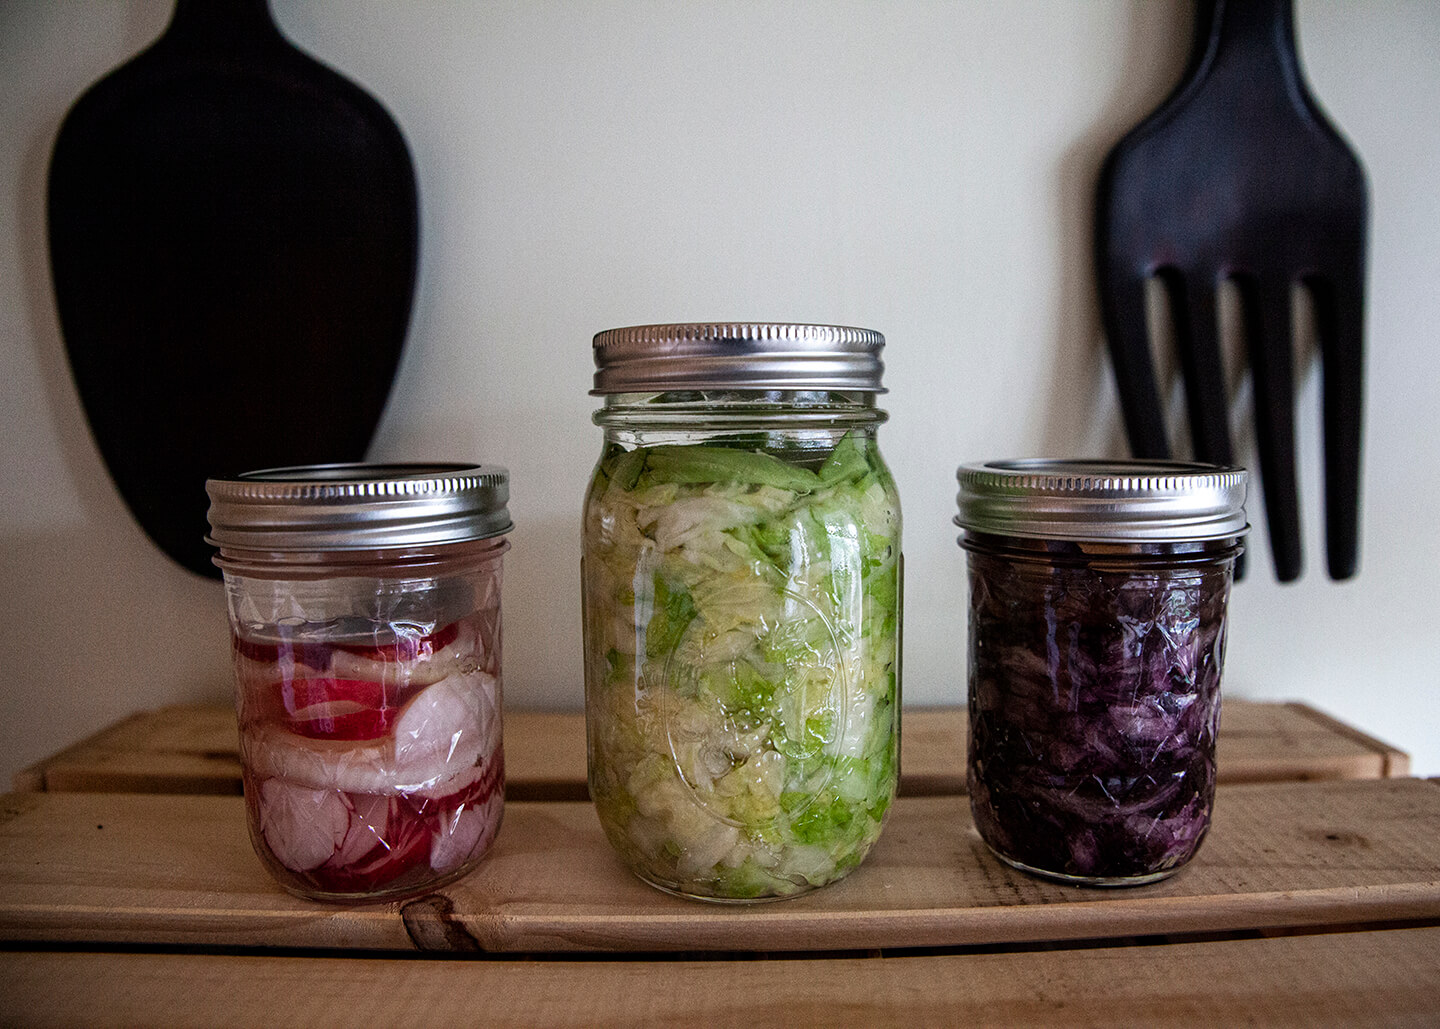 Three glass jars holding fermented radishes, red cabbage and green cabbage.